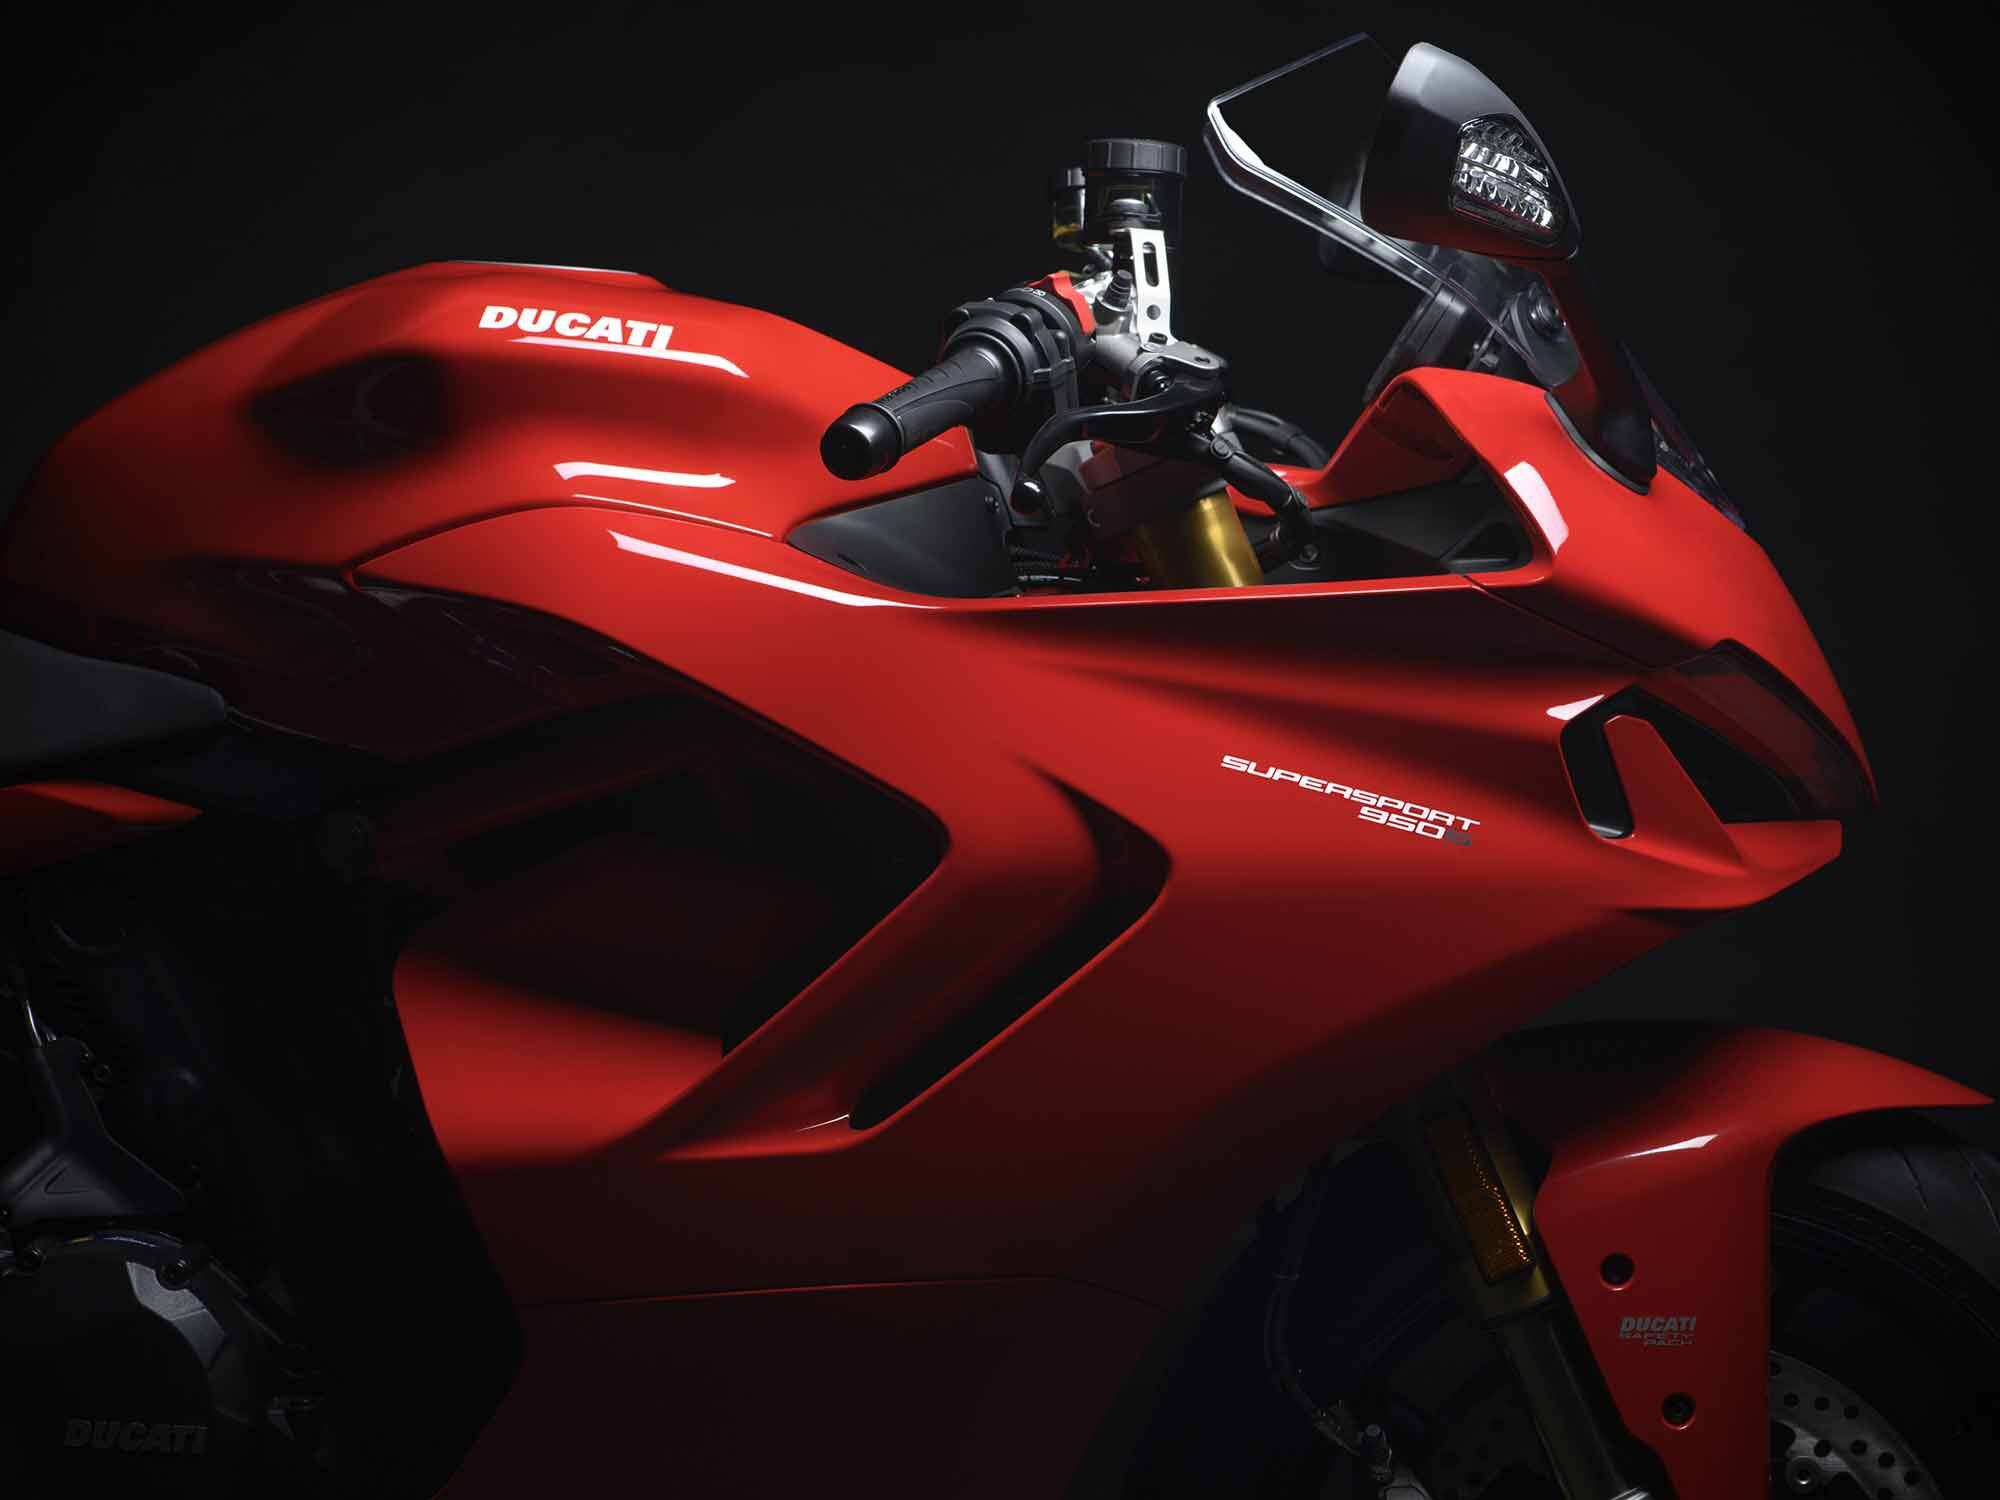 The 2021 Ducati SuperSport 950 S.